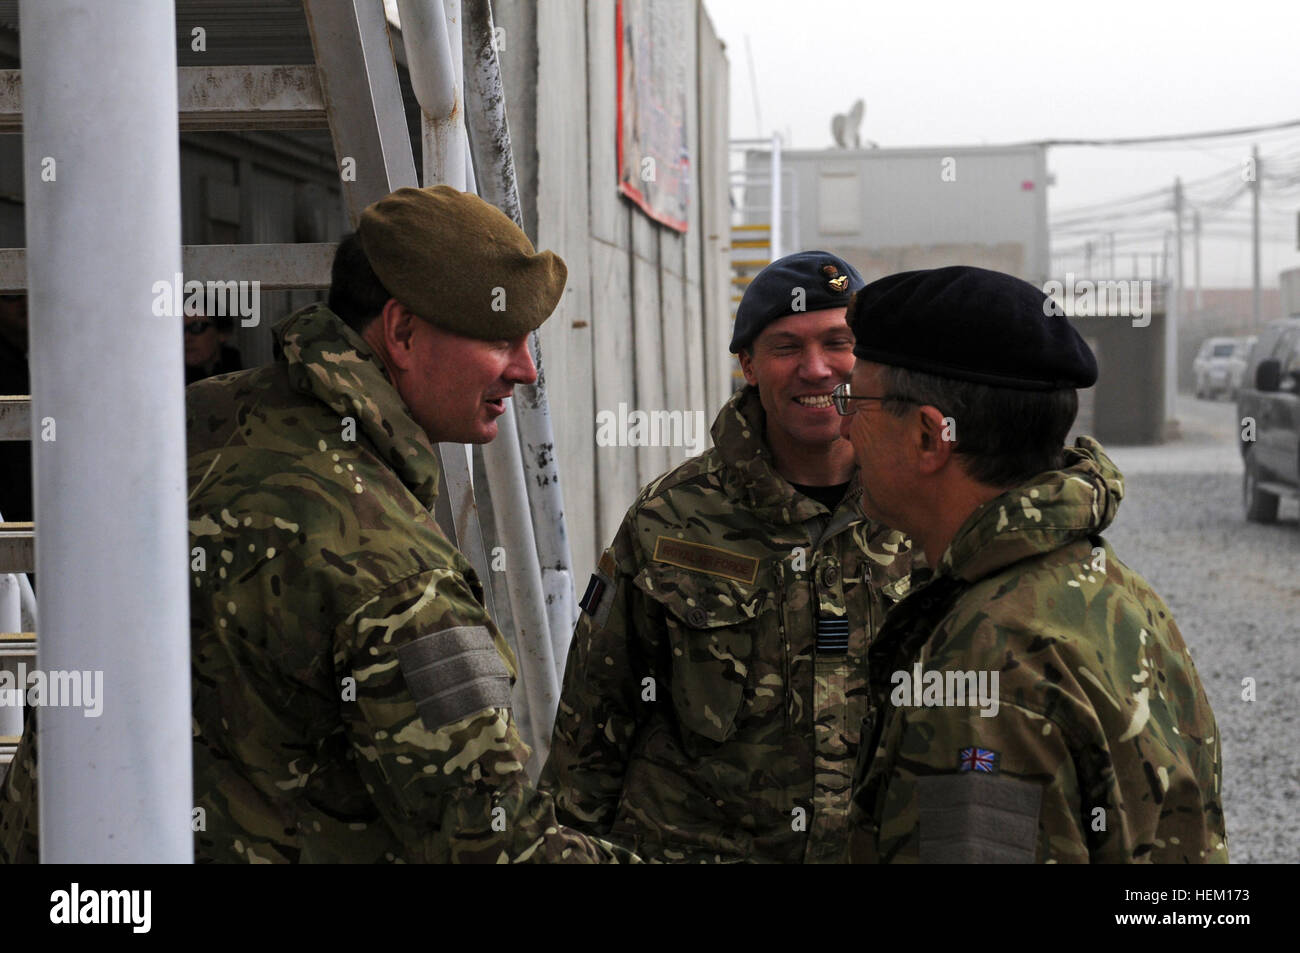 British Gen. Sir David J. Richards, chief of the Defense Staff, is greeted by Maj. Justin Hughes, Regional Command (South) CJ-3/5, and Wing Commander Rob Humphries, ISAF Joint Command headquarters, as he arrives at RC(S) headquarters on Kandahar Airfield Dec. 20. Richards accompanied Prime Minister David Cameron for his surprise visit to see British troops in the area and to meet briefly with RC(S) leadership. British Chief of Defense Staff greets British service members in Regional Command (South) 503049 Stock Photo